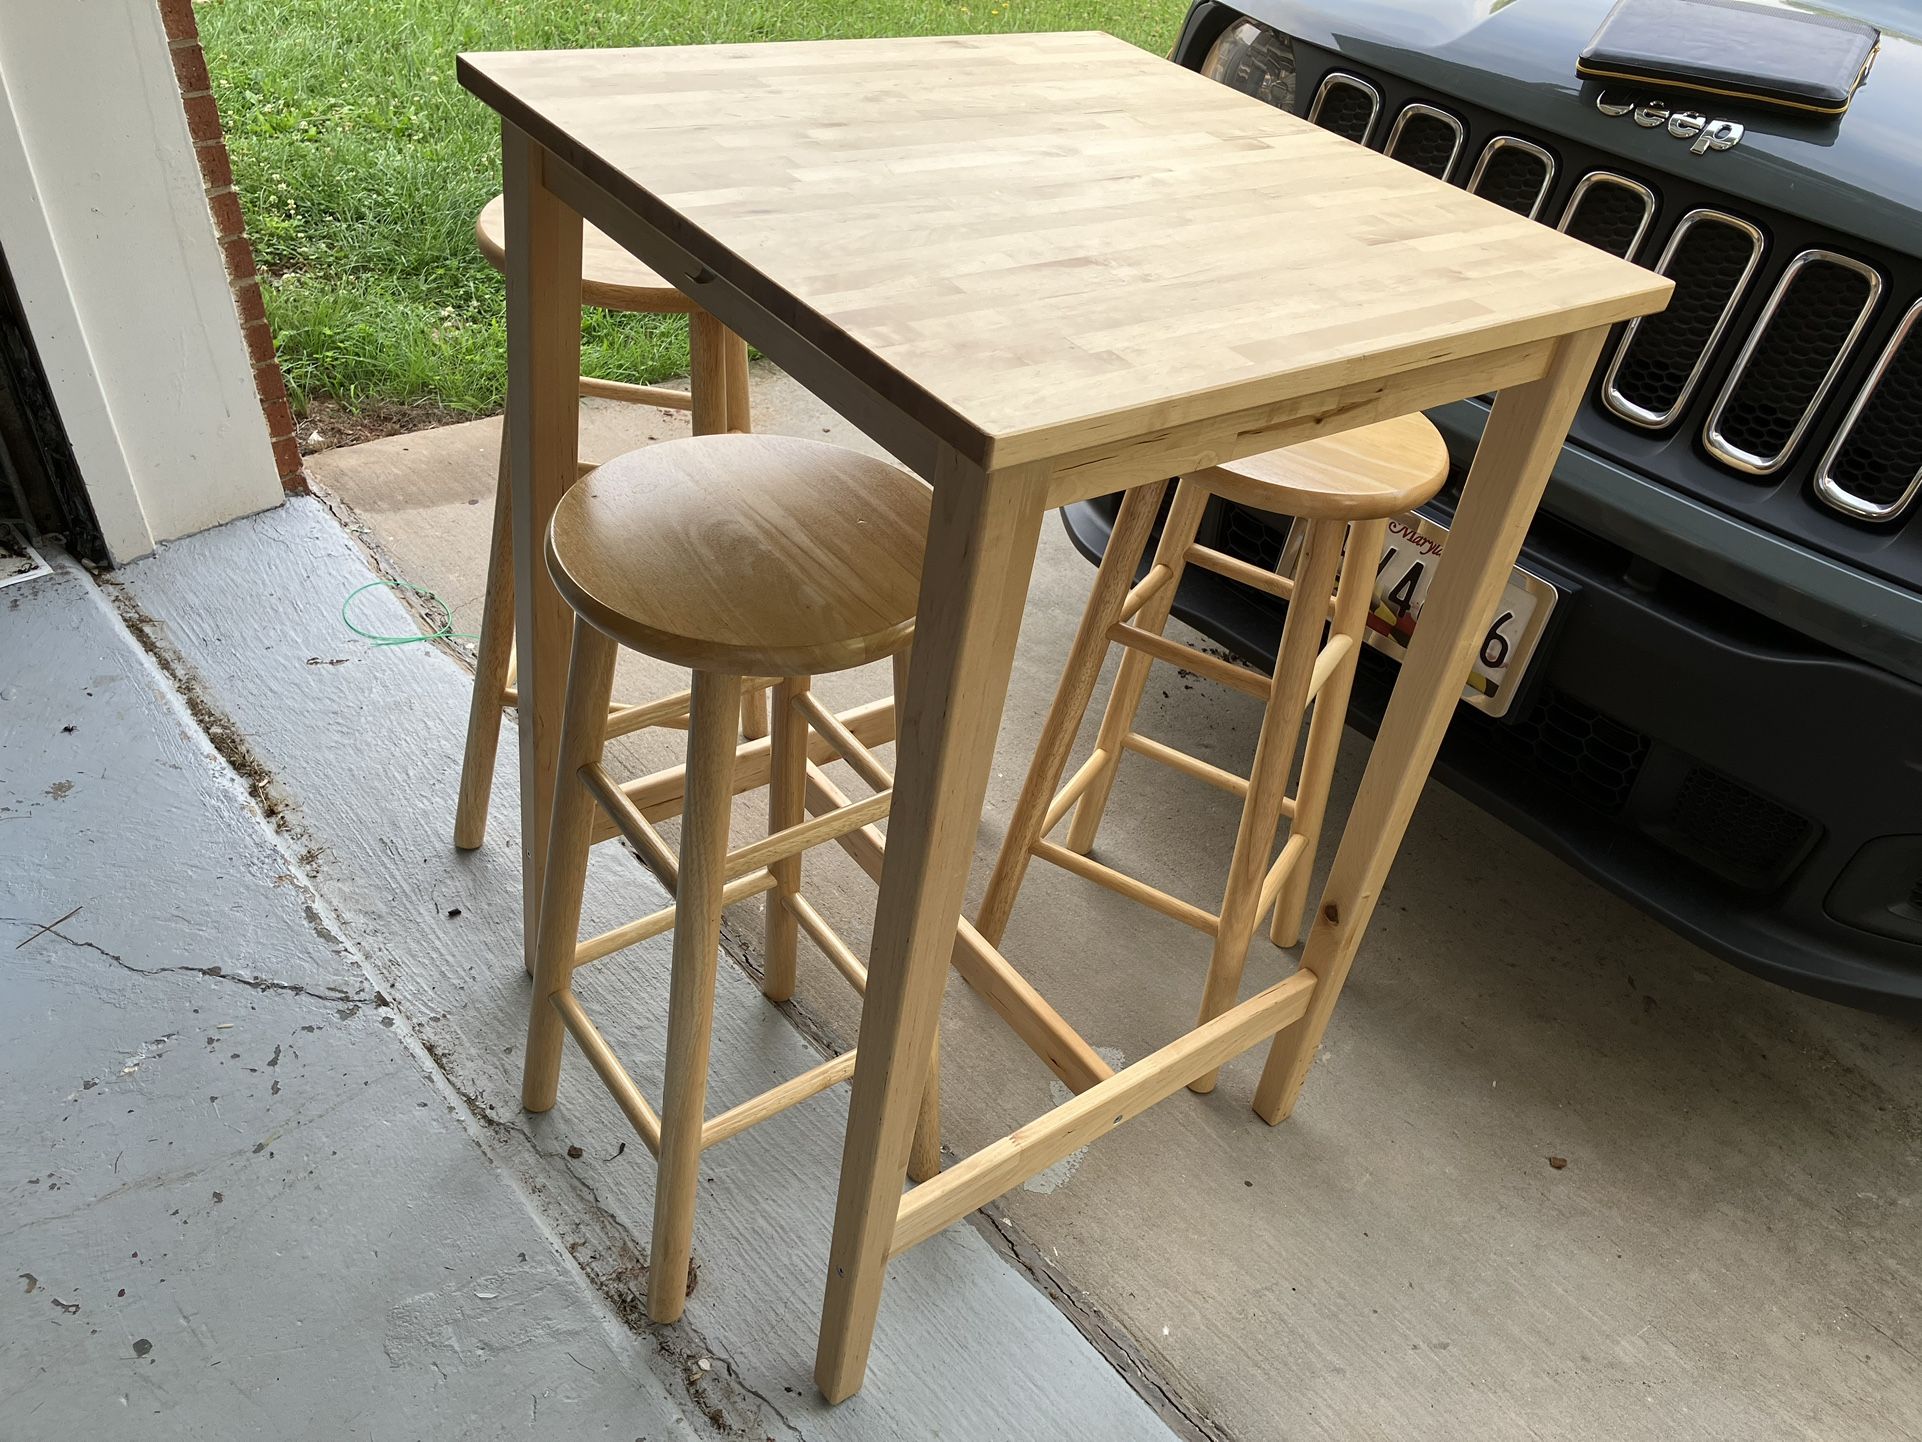 Wood Table With 3 Stools 